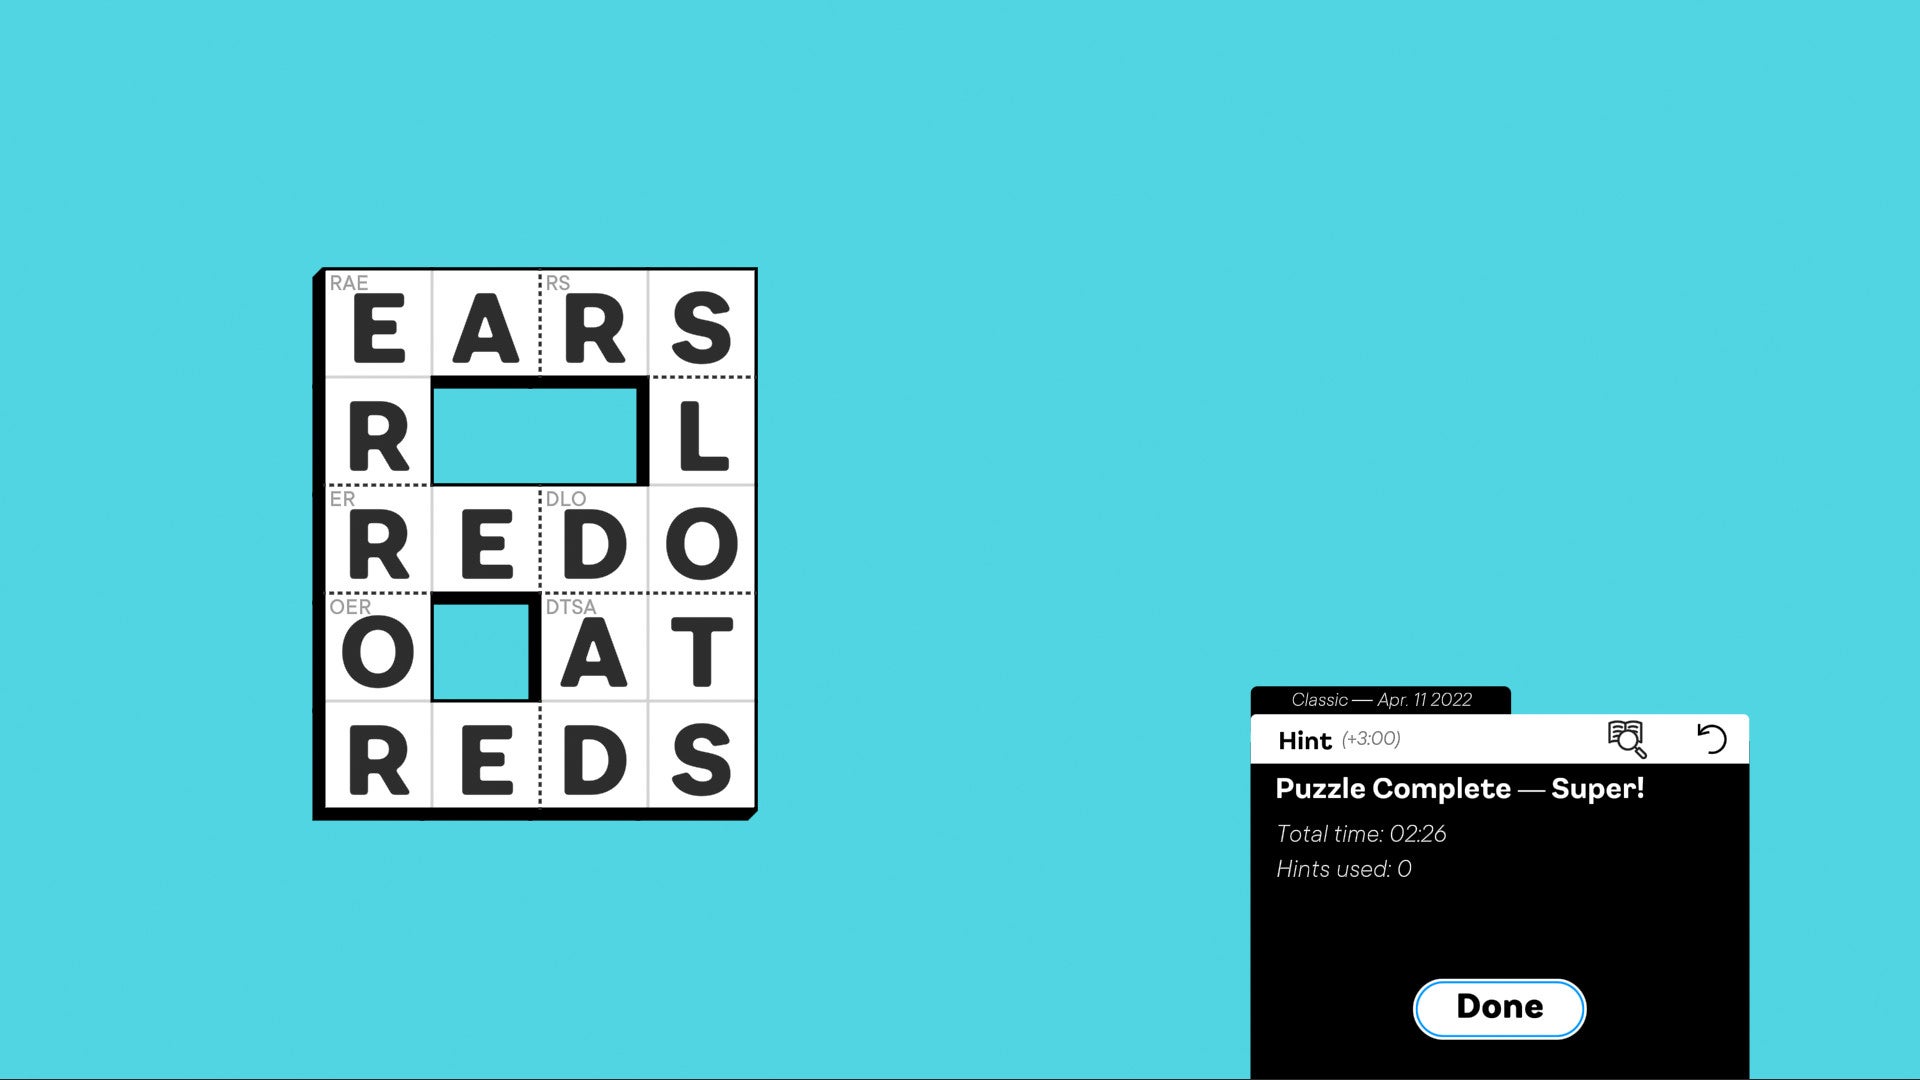 A screenshot of Knotwords, a crossword-style logic puzzle game, showing a single puzzle screen against a pale blue background.